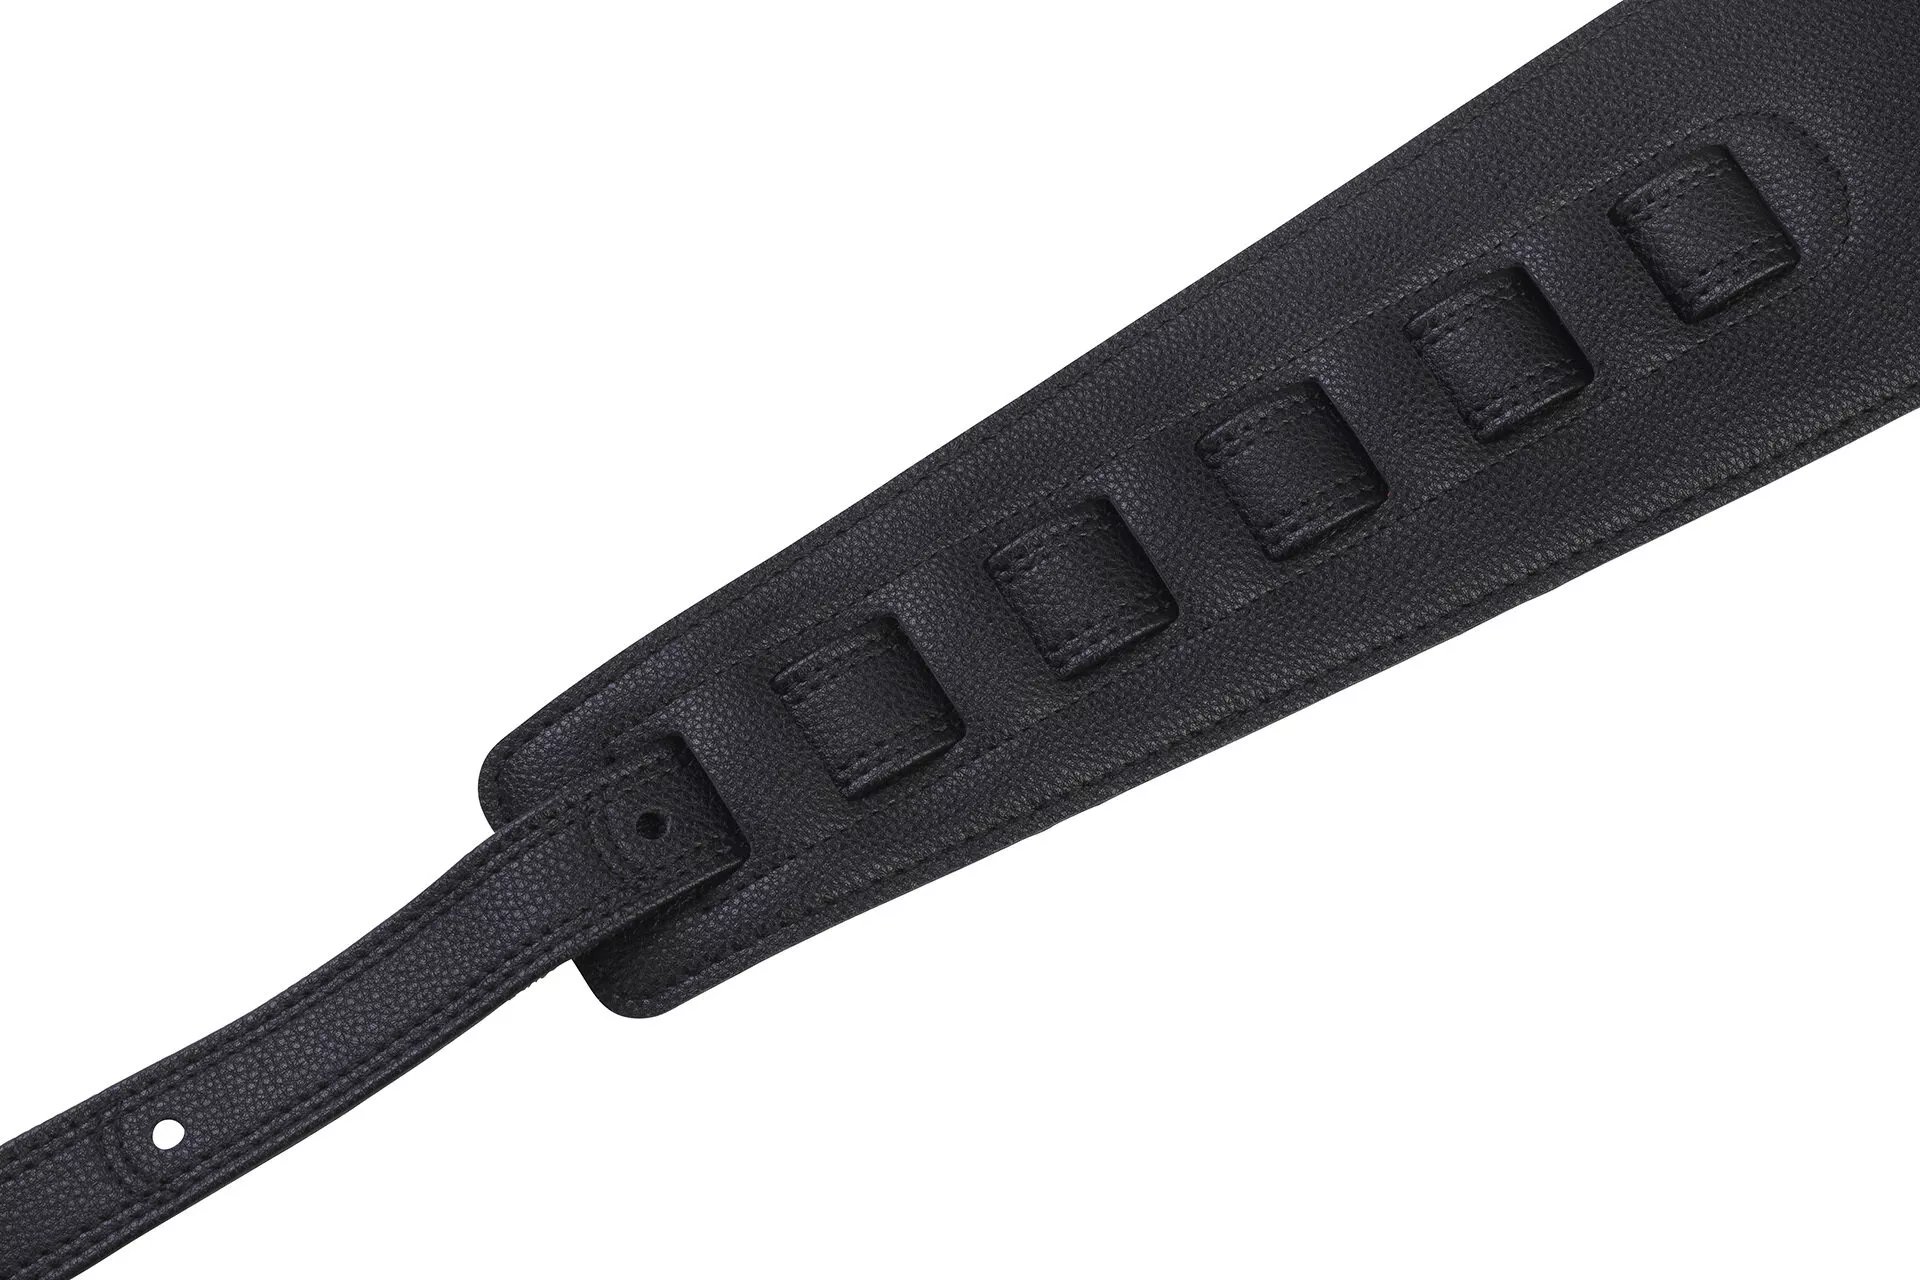 Sadowsky Synthetic Leather Bass Strap with Neoprene Padding - Black with Gold Embossing